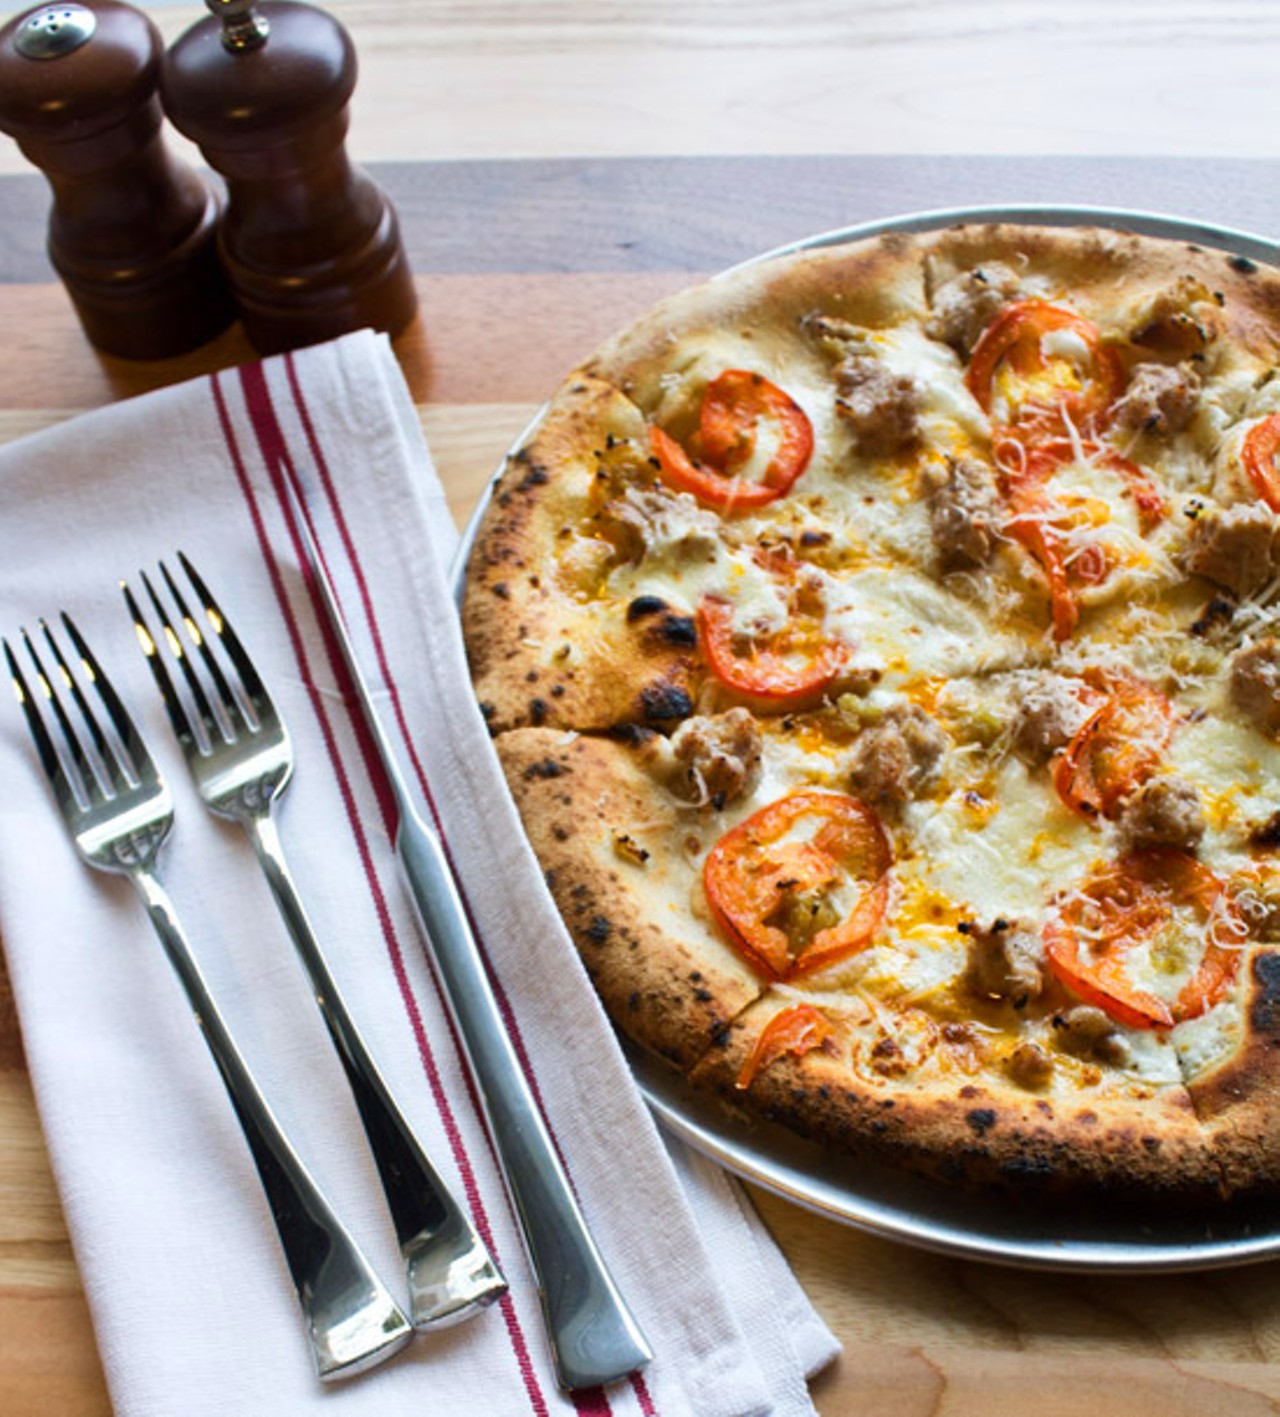 Spicy diavolo pizza with heritage Berkshire sausage, spicy marinated tomatoes, housemade mozzarella, chile oil and fresh Parmesan. Read more: Central Table Food Hall Offers Artisan Eats in the Central West End [Photos]